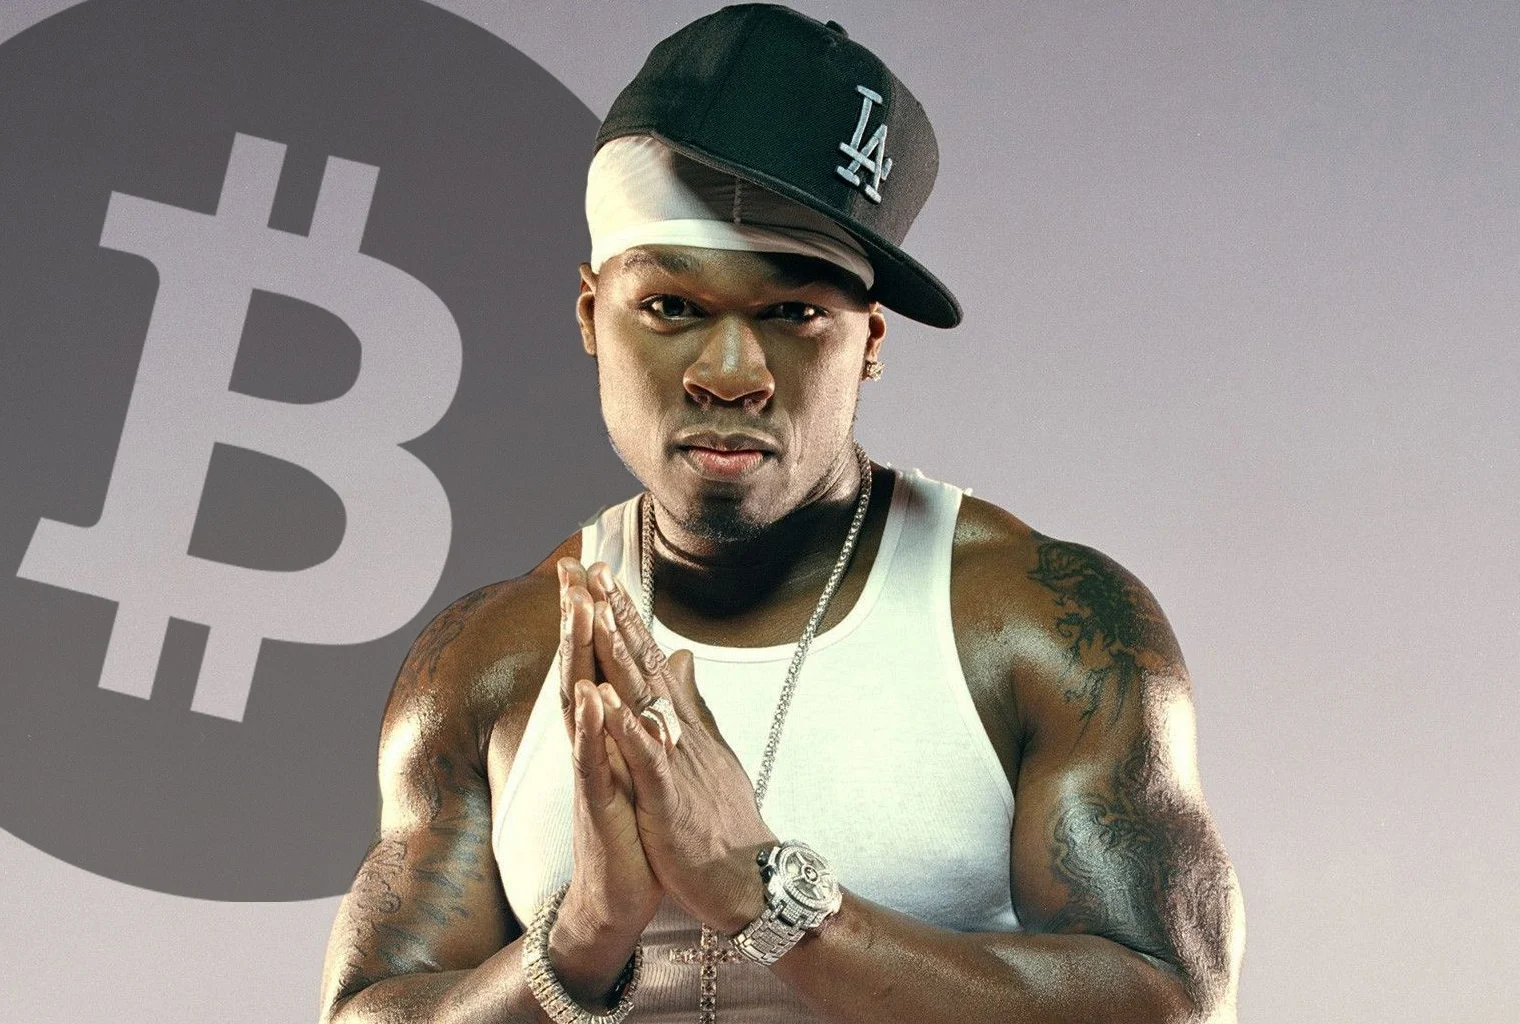 How Rapper 50 Cent Turned His Album Sales Into a $48 Million Bitcoin Fortune